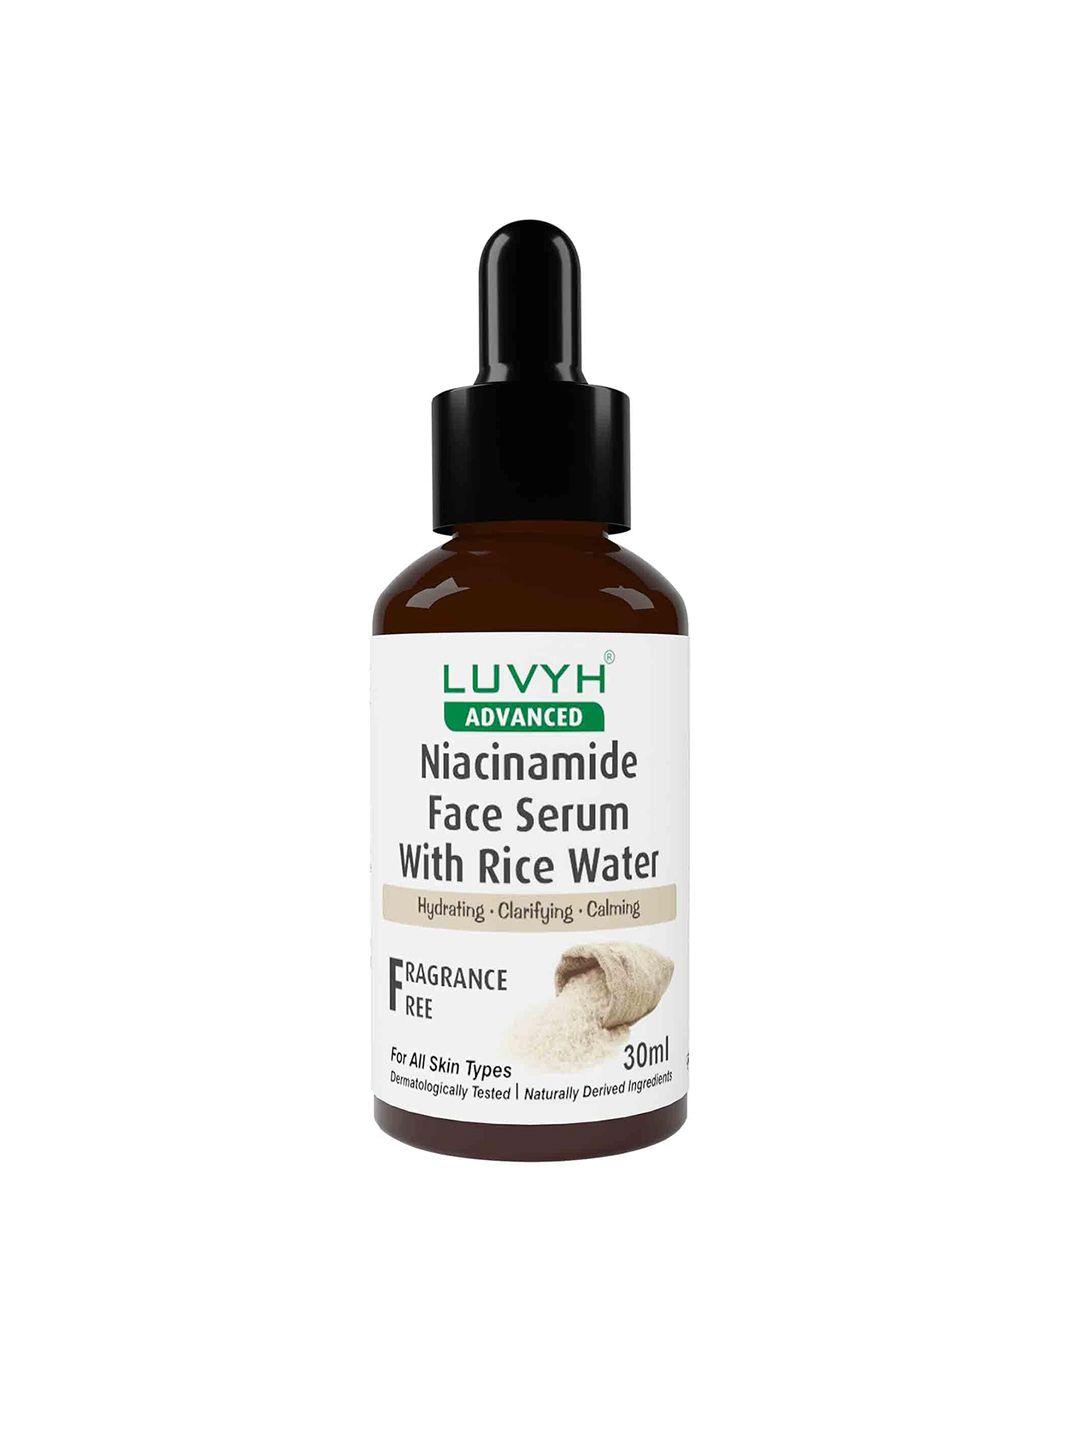 luvyh niacinamide fragrance-free face serum with rice water - 30 ml